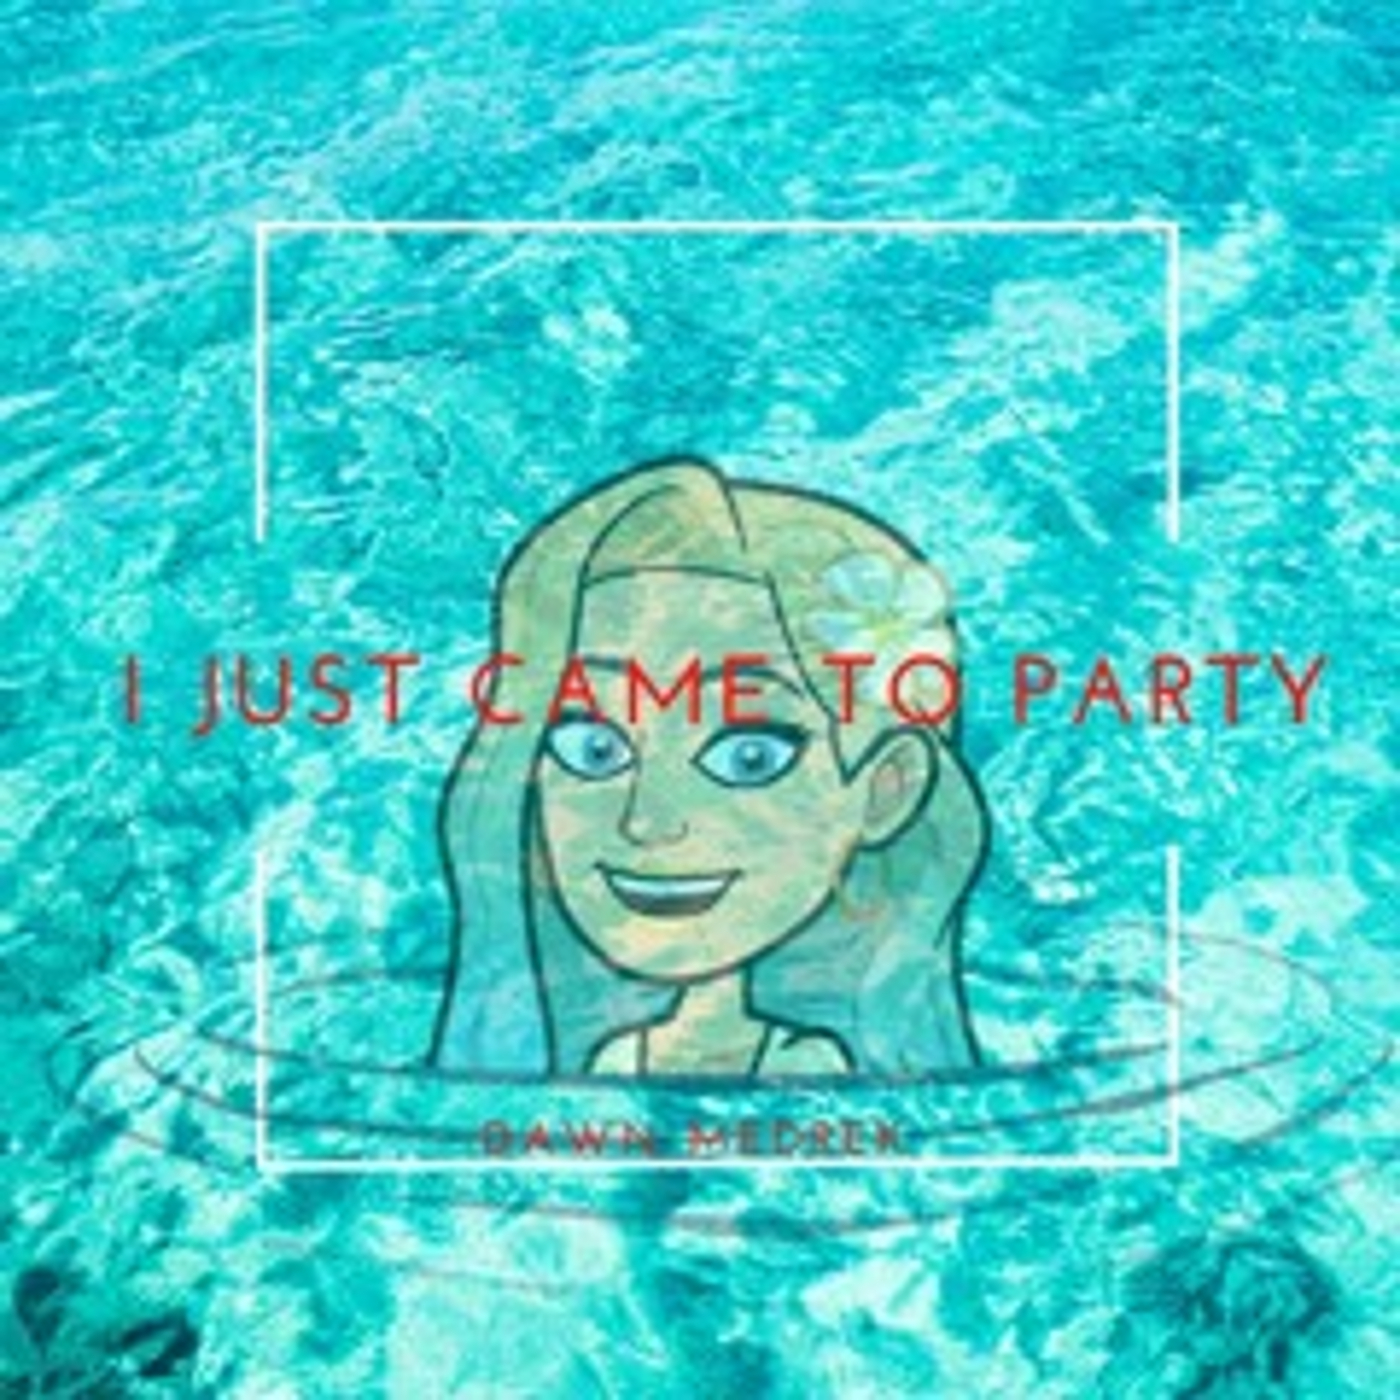 Dawn Medrek — I Just Came To Party cover artwork